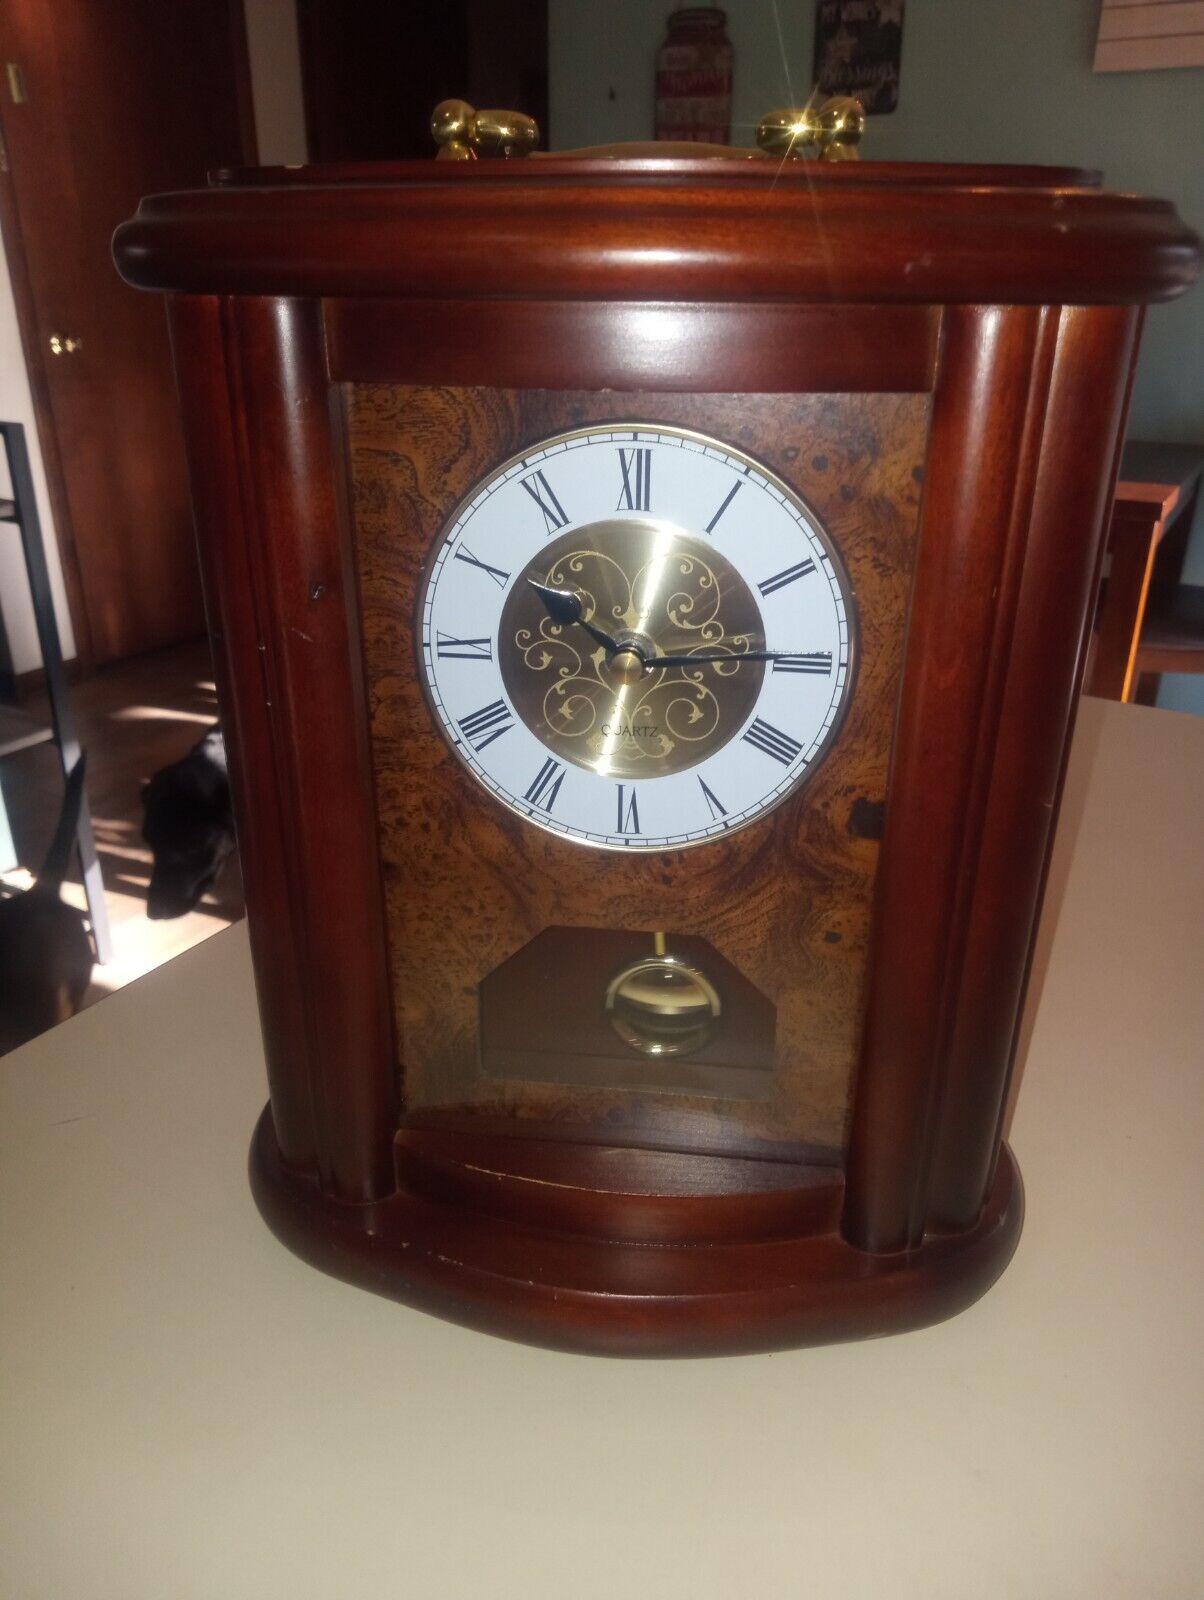 Working Quartz Mantle Clock 11 In Tall Mahogany Color No Chime